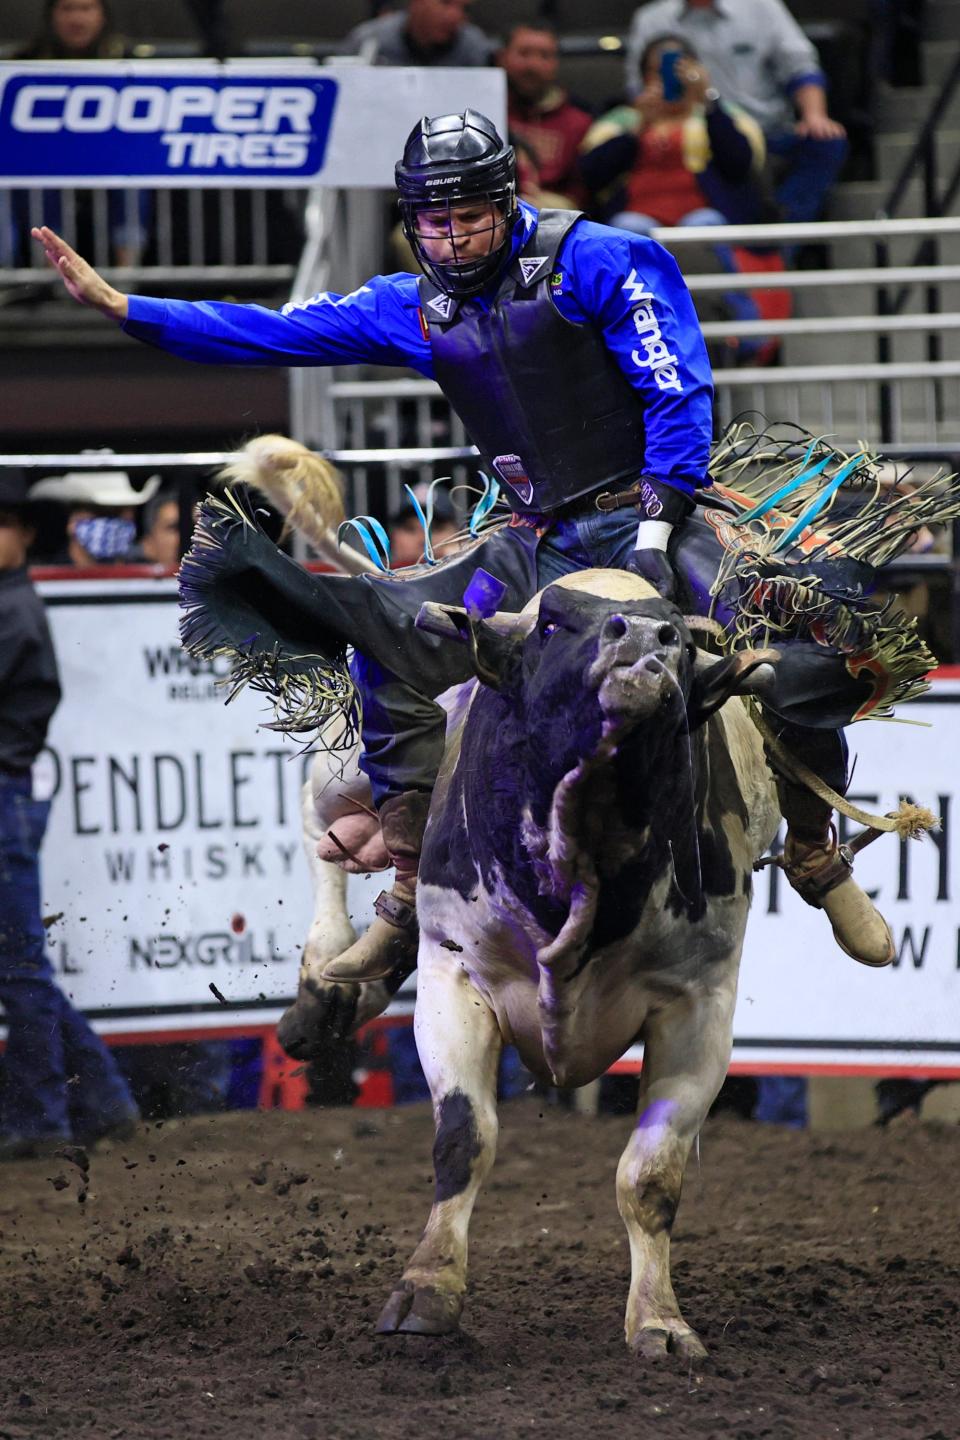 Dakota Louis of Browning, Mont. rides Stetson during the PBR Pendleton Whisky Velocity Tour in 2022 at VyStar Veterans Memorial Arena. Unlike the 2022 event, this weekend's stop will include the top-flight Unleash the Beast tour.